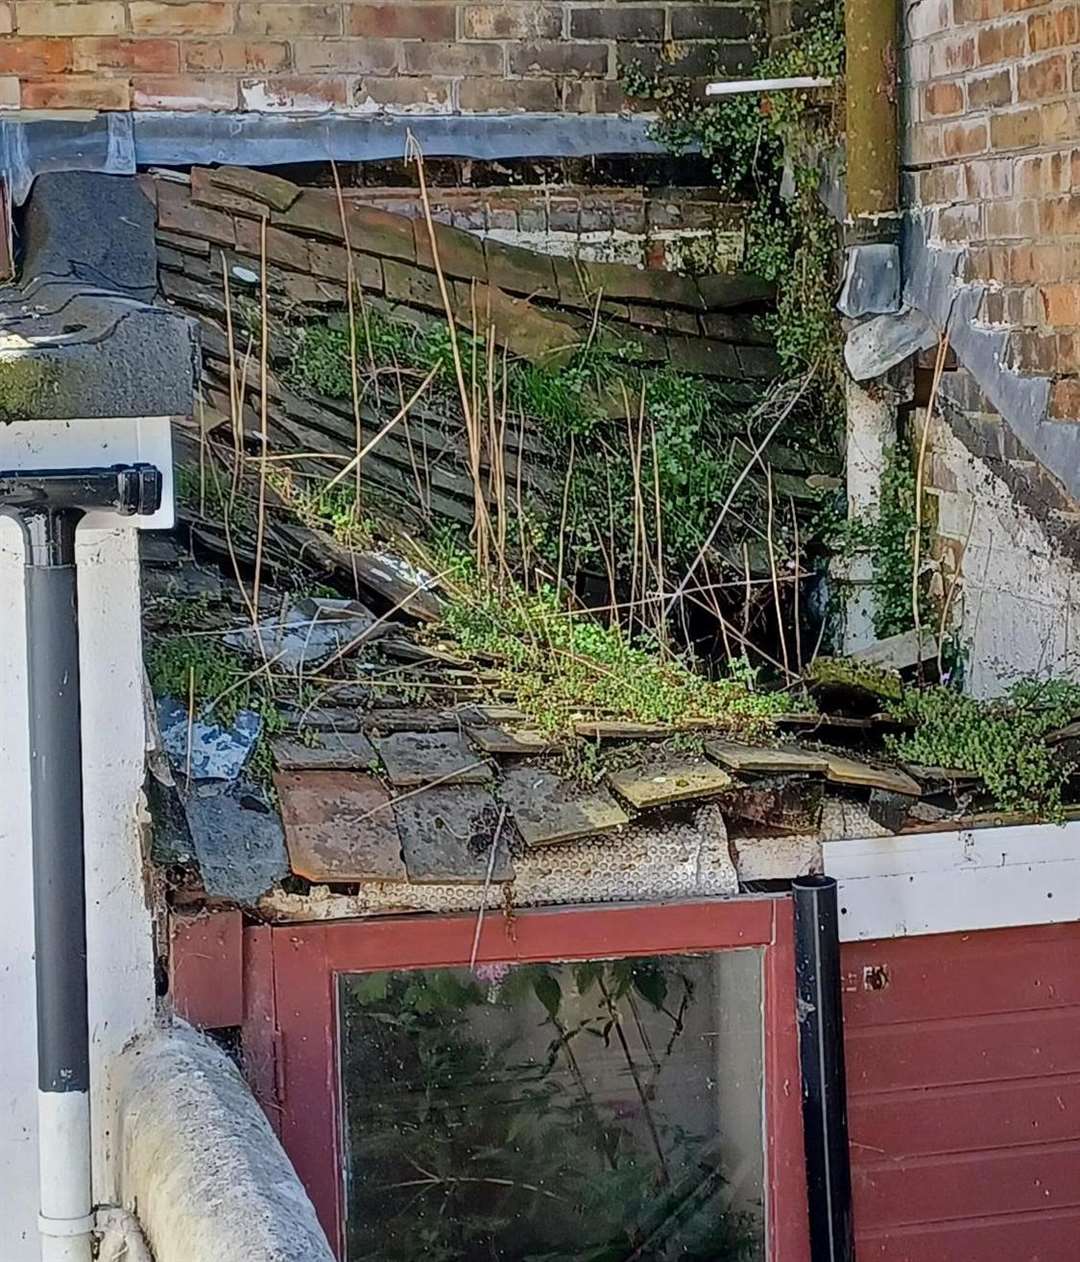 A section of the roof has collapsed at the house. Picture: Folkestone and Hythe District Council